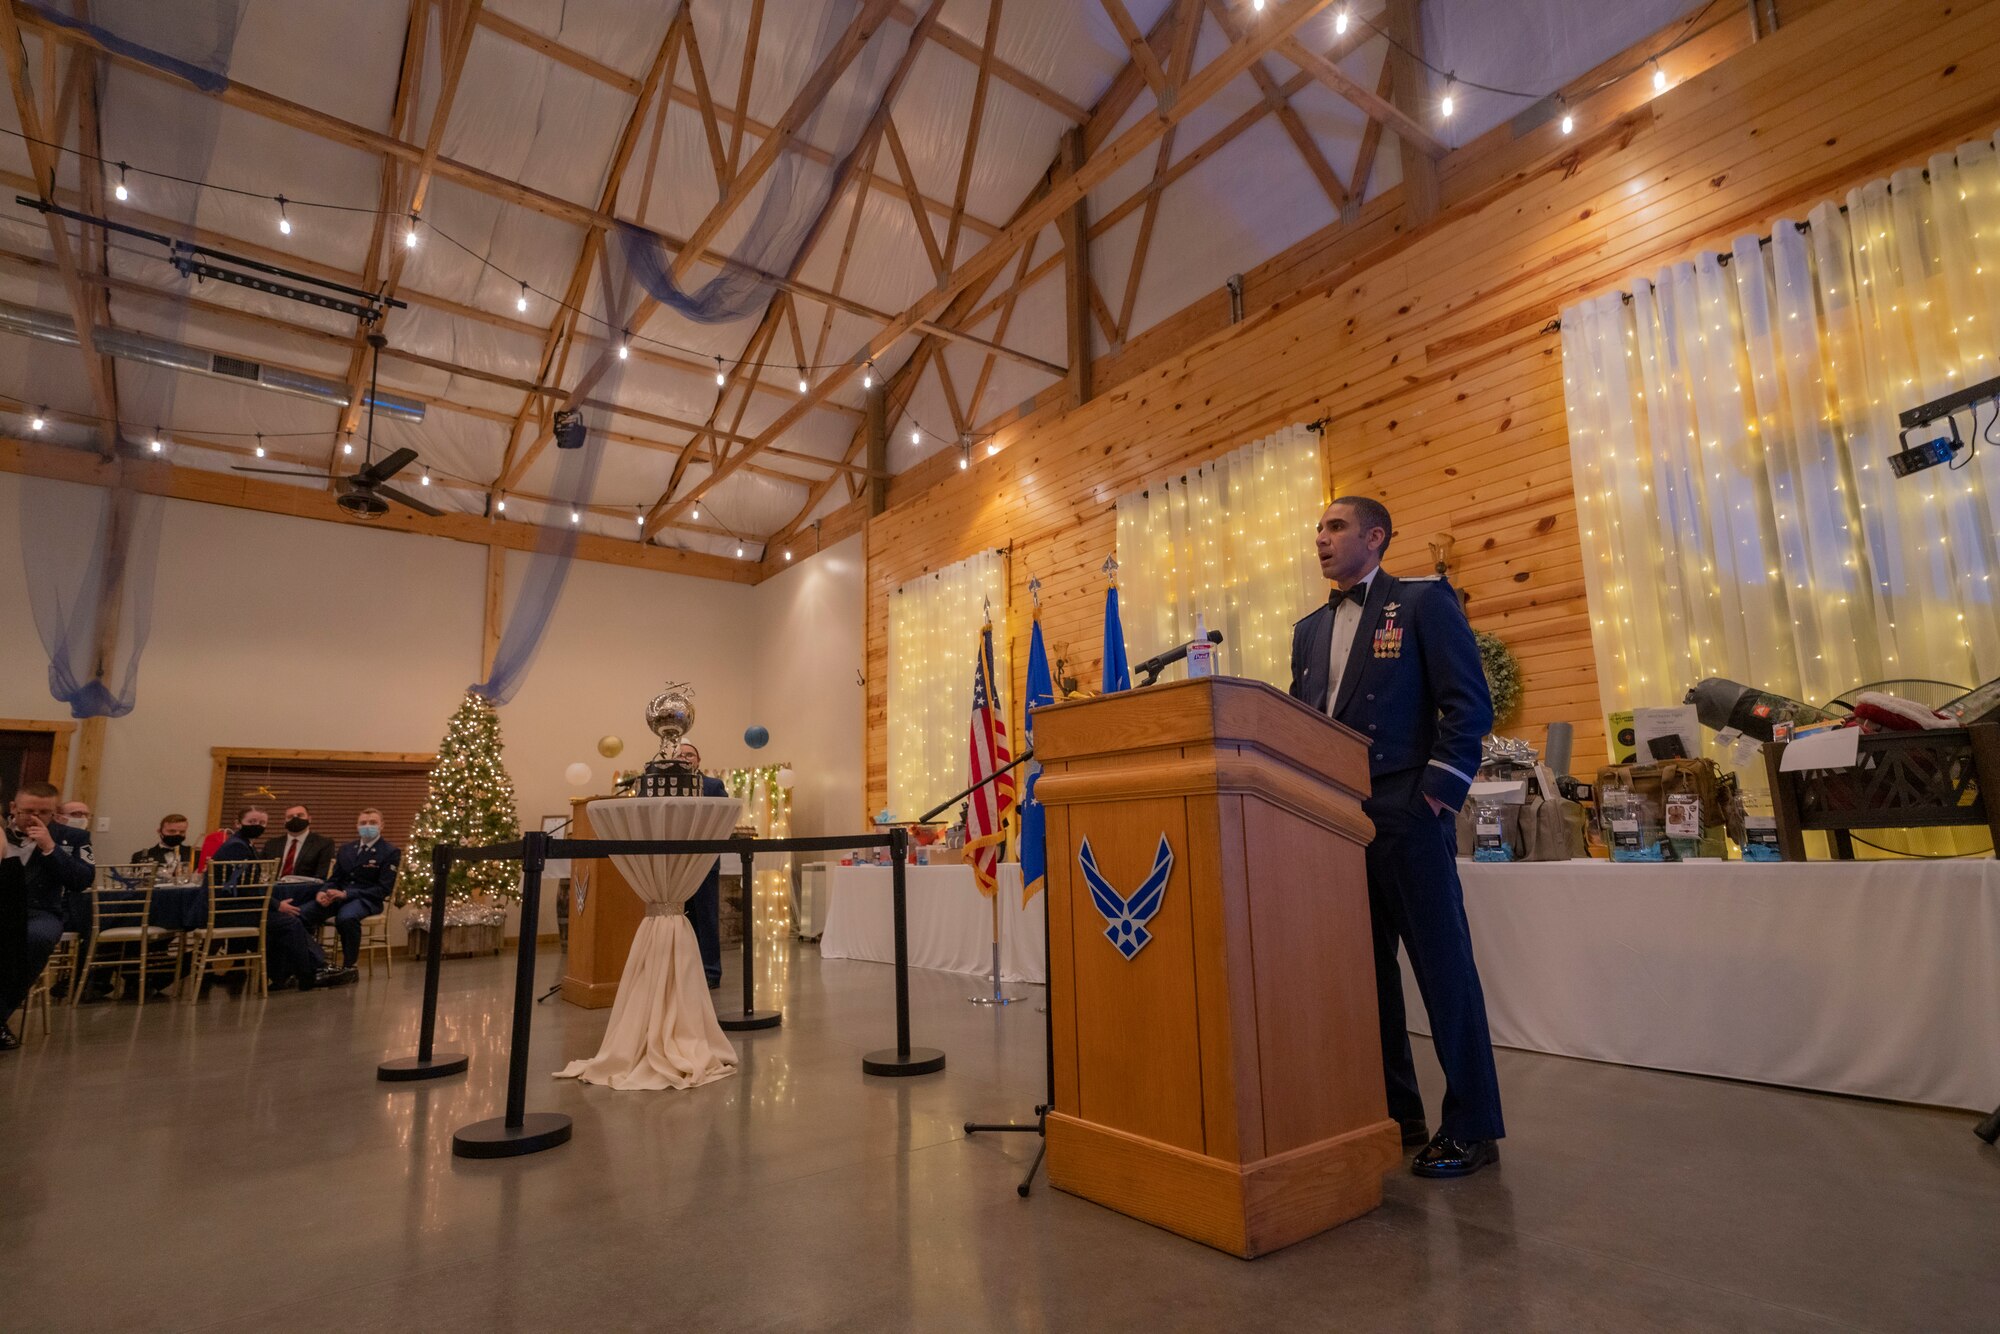 Male Airman stands at a podium next to an award and speaks to an audience.